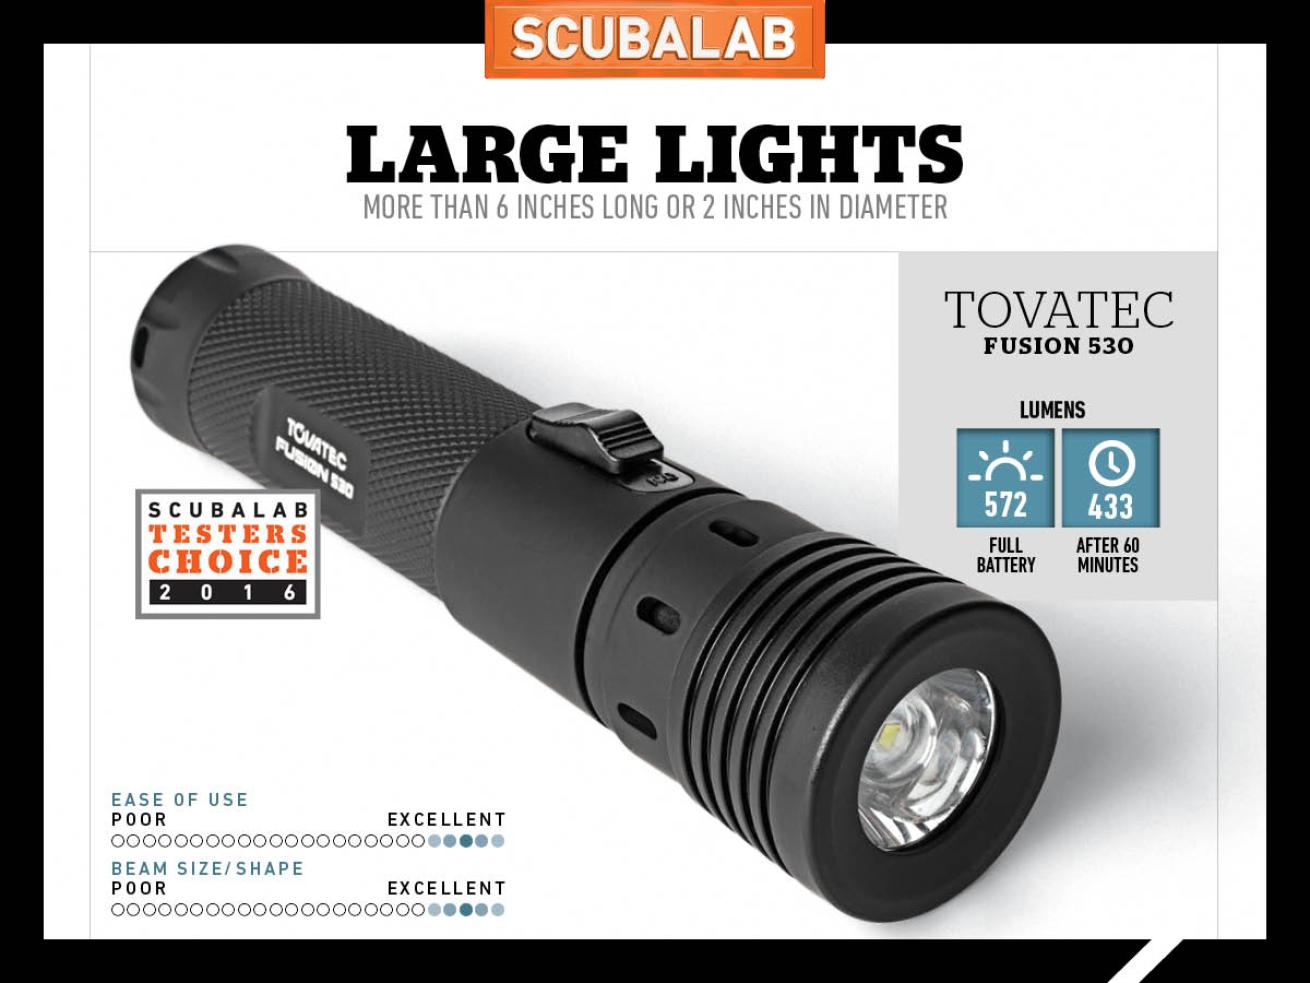 Tovatec Fusion 530 Scuba Diving Light Reviewed by ScubaLab